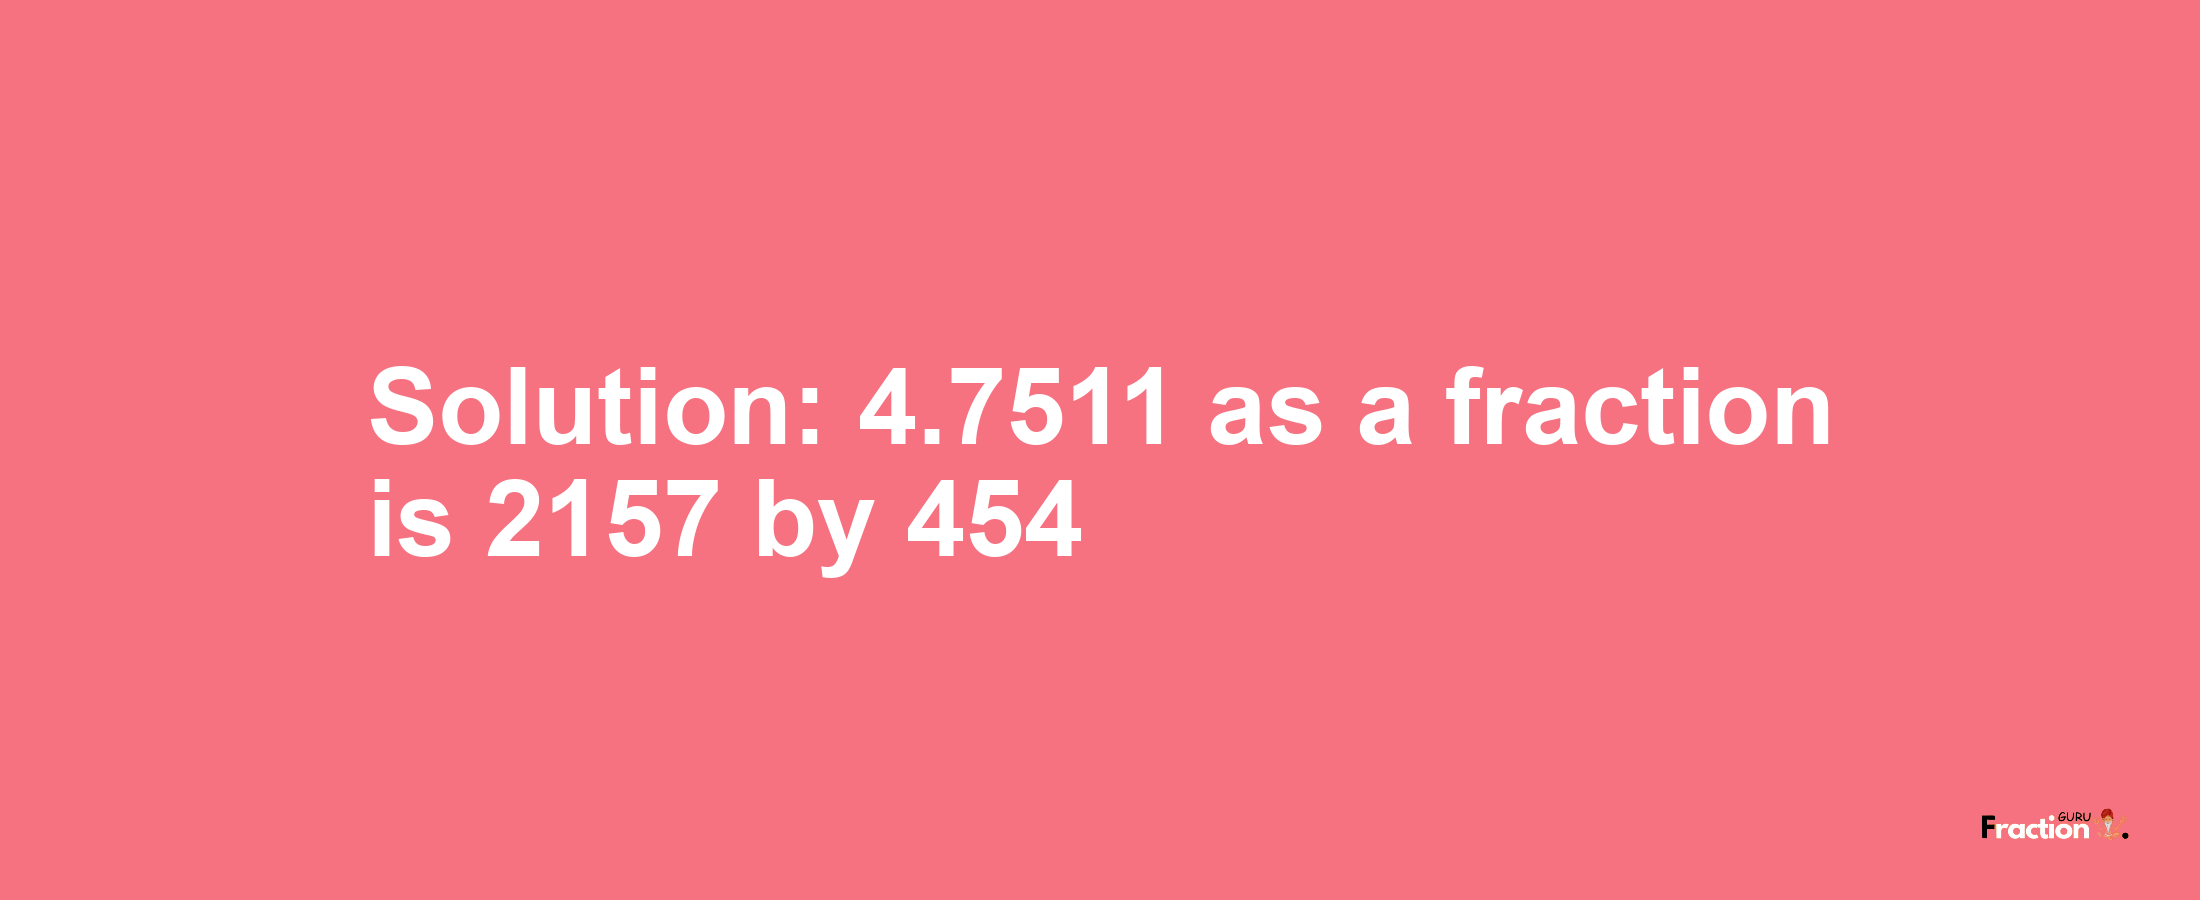 Solution:4.7511 as a fraction is 2157/454